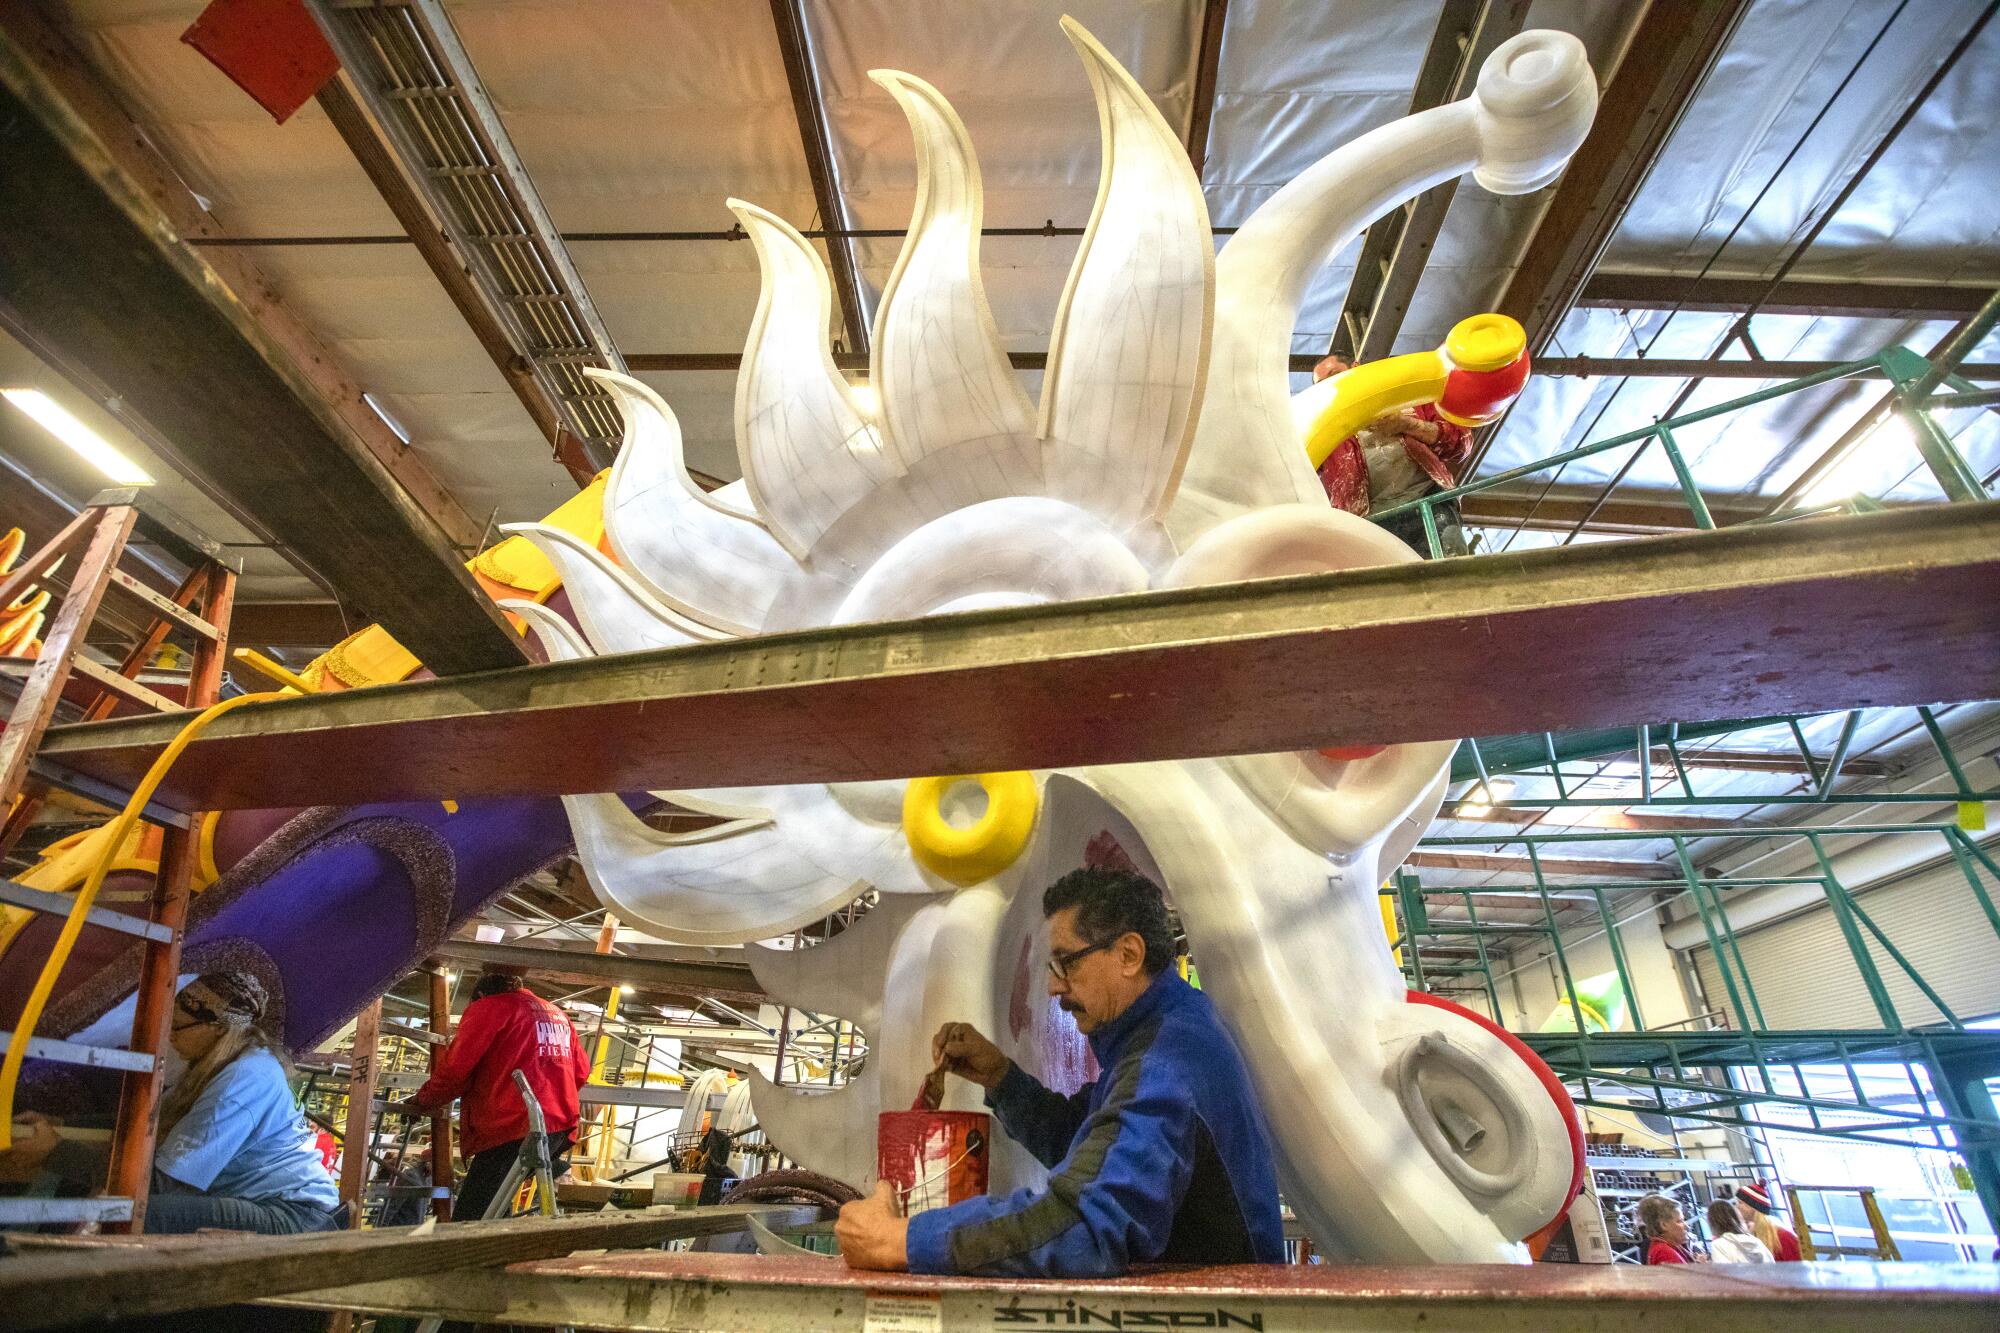 Andres Trujillo works on Donate Life's "Lifting Each Other Up" float.